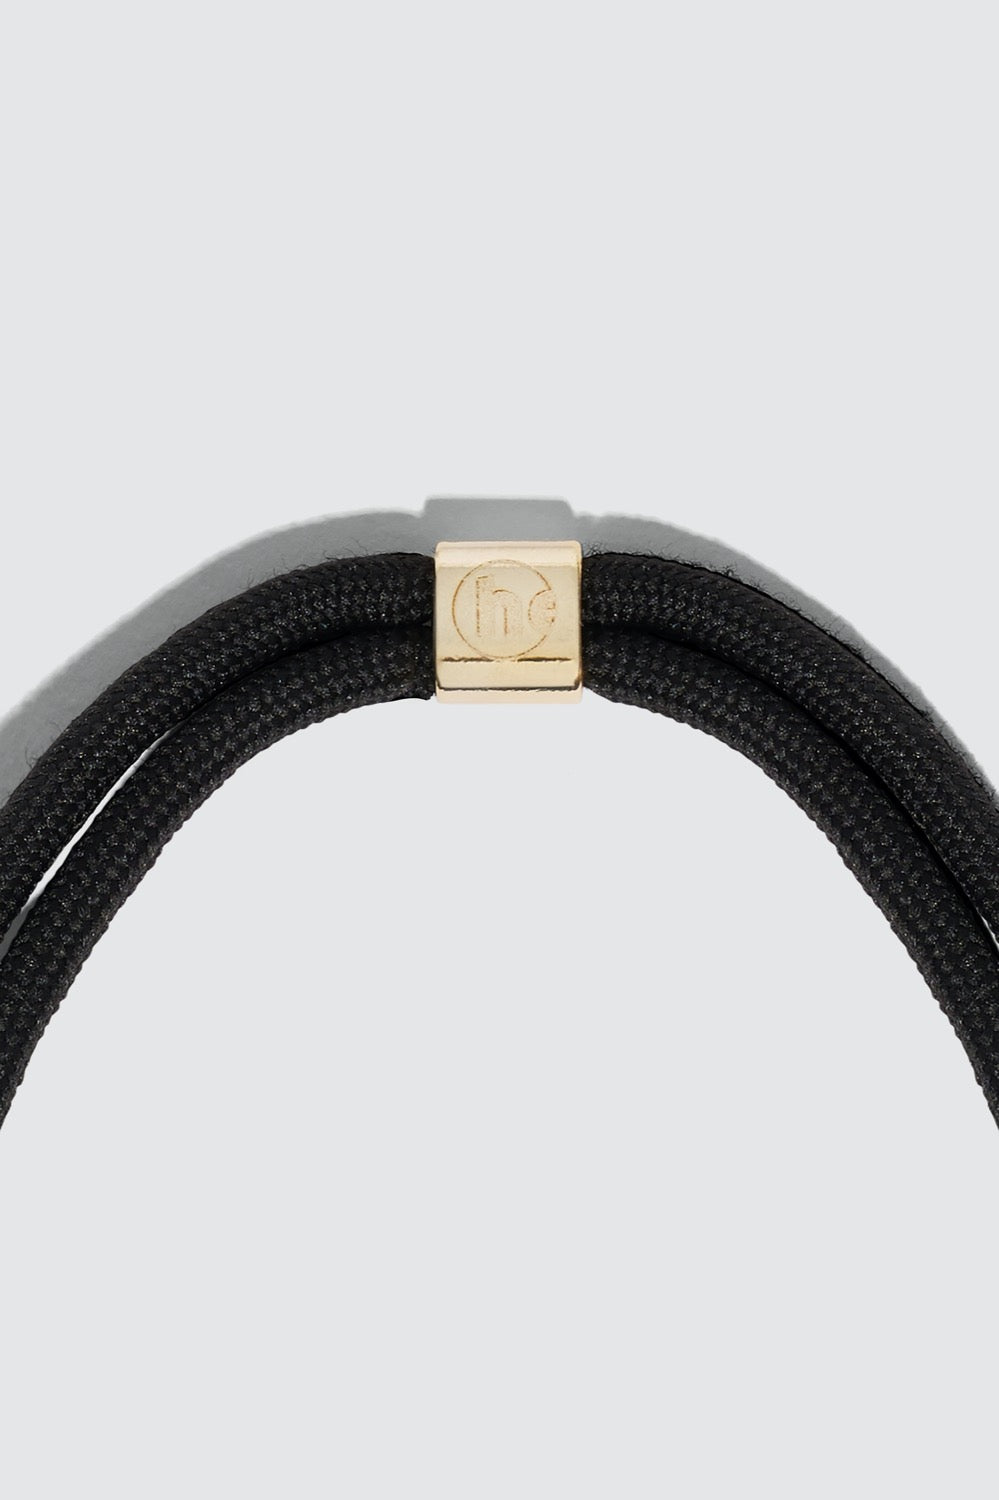 Gold and black phone strap